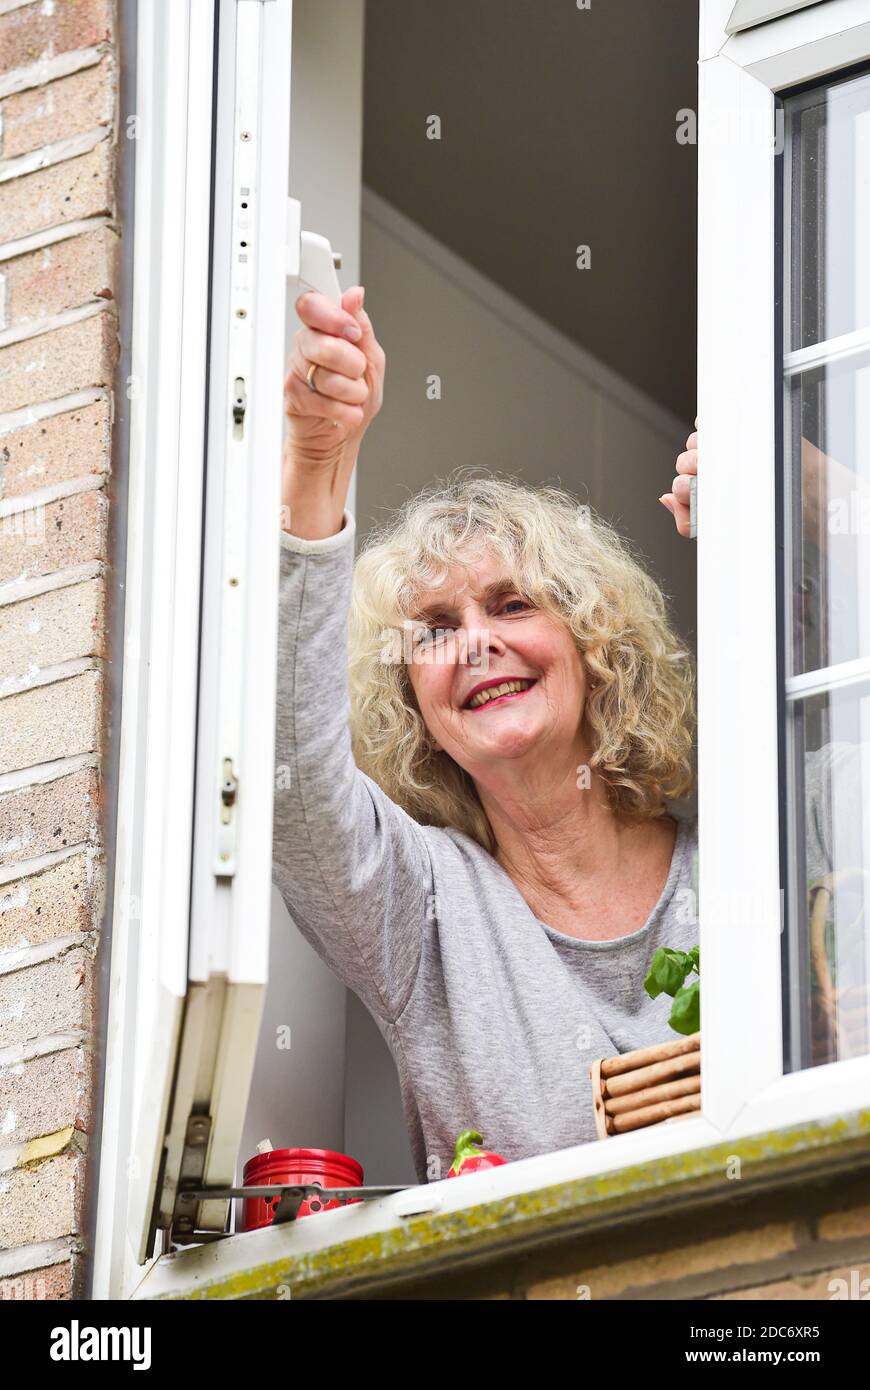 Woman at home opening kitchen window to let in fresh air as advised to help combat coronavirus COVID-19 virus Stock Photo